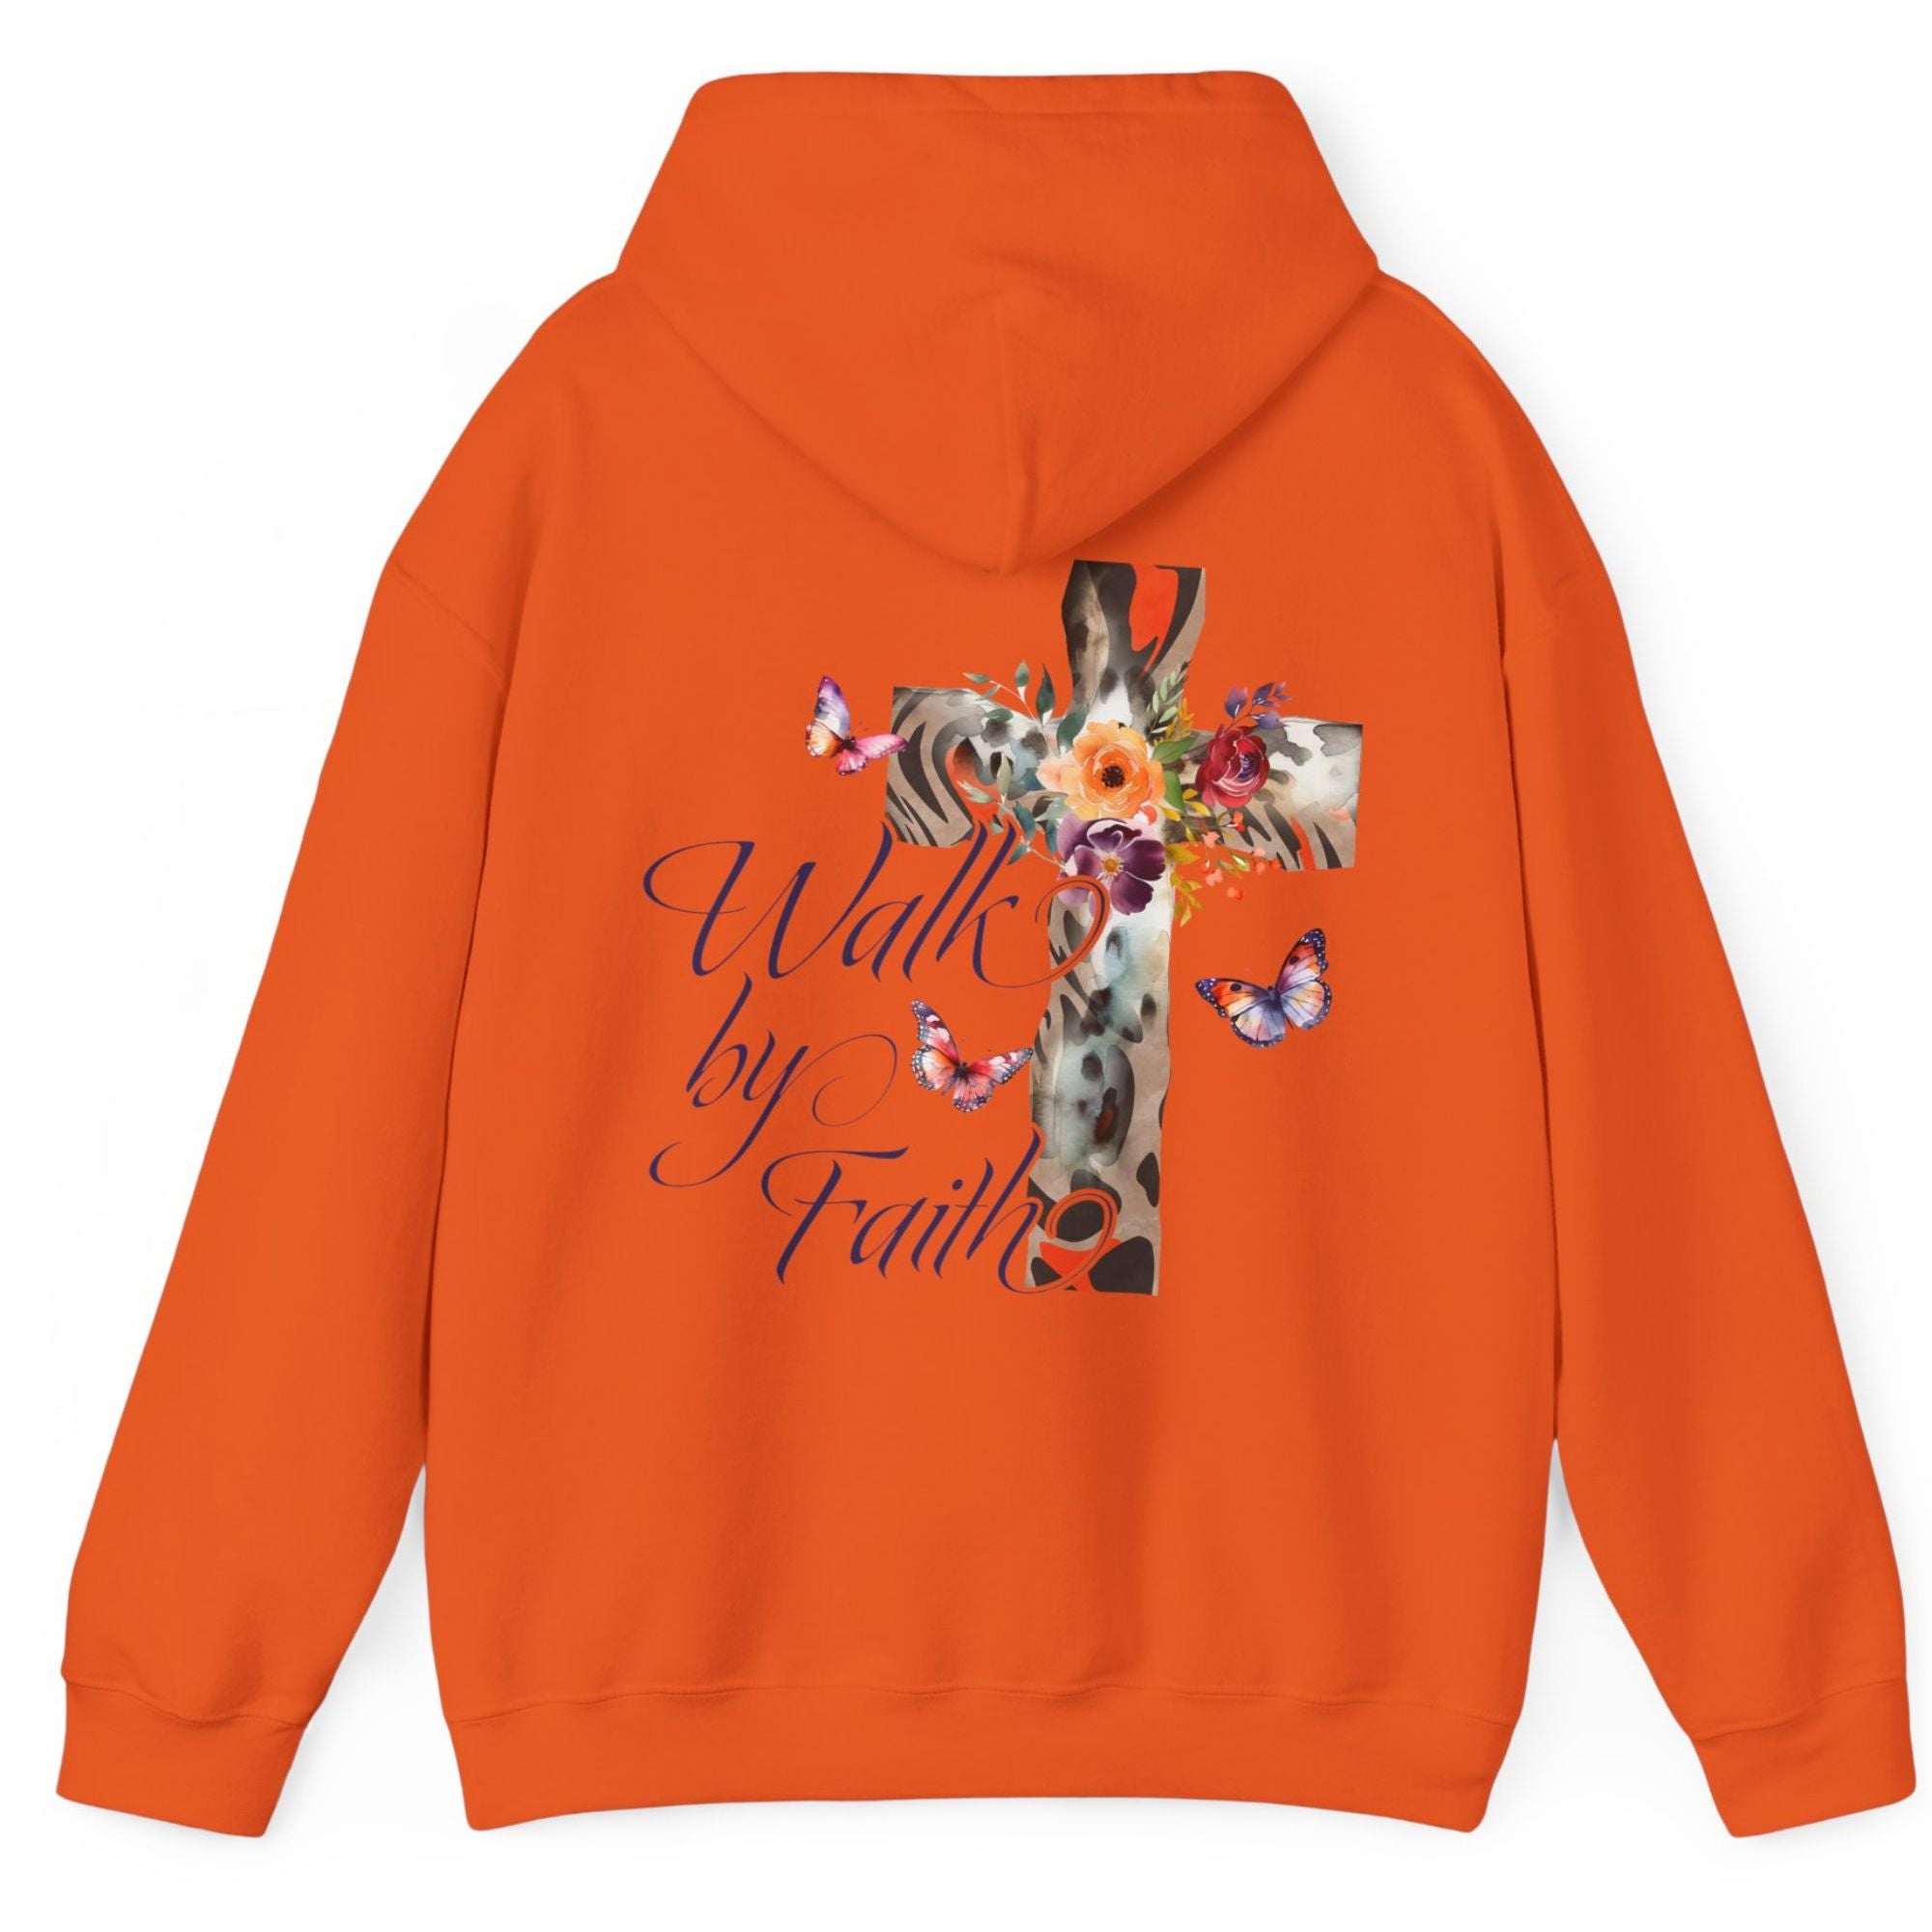 Walk by Faith Butterfly Cross Unisex-Fit Hoodie Colors: White Sizes: S Jesus Passion Apparel